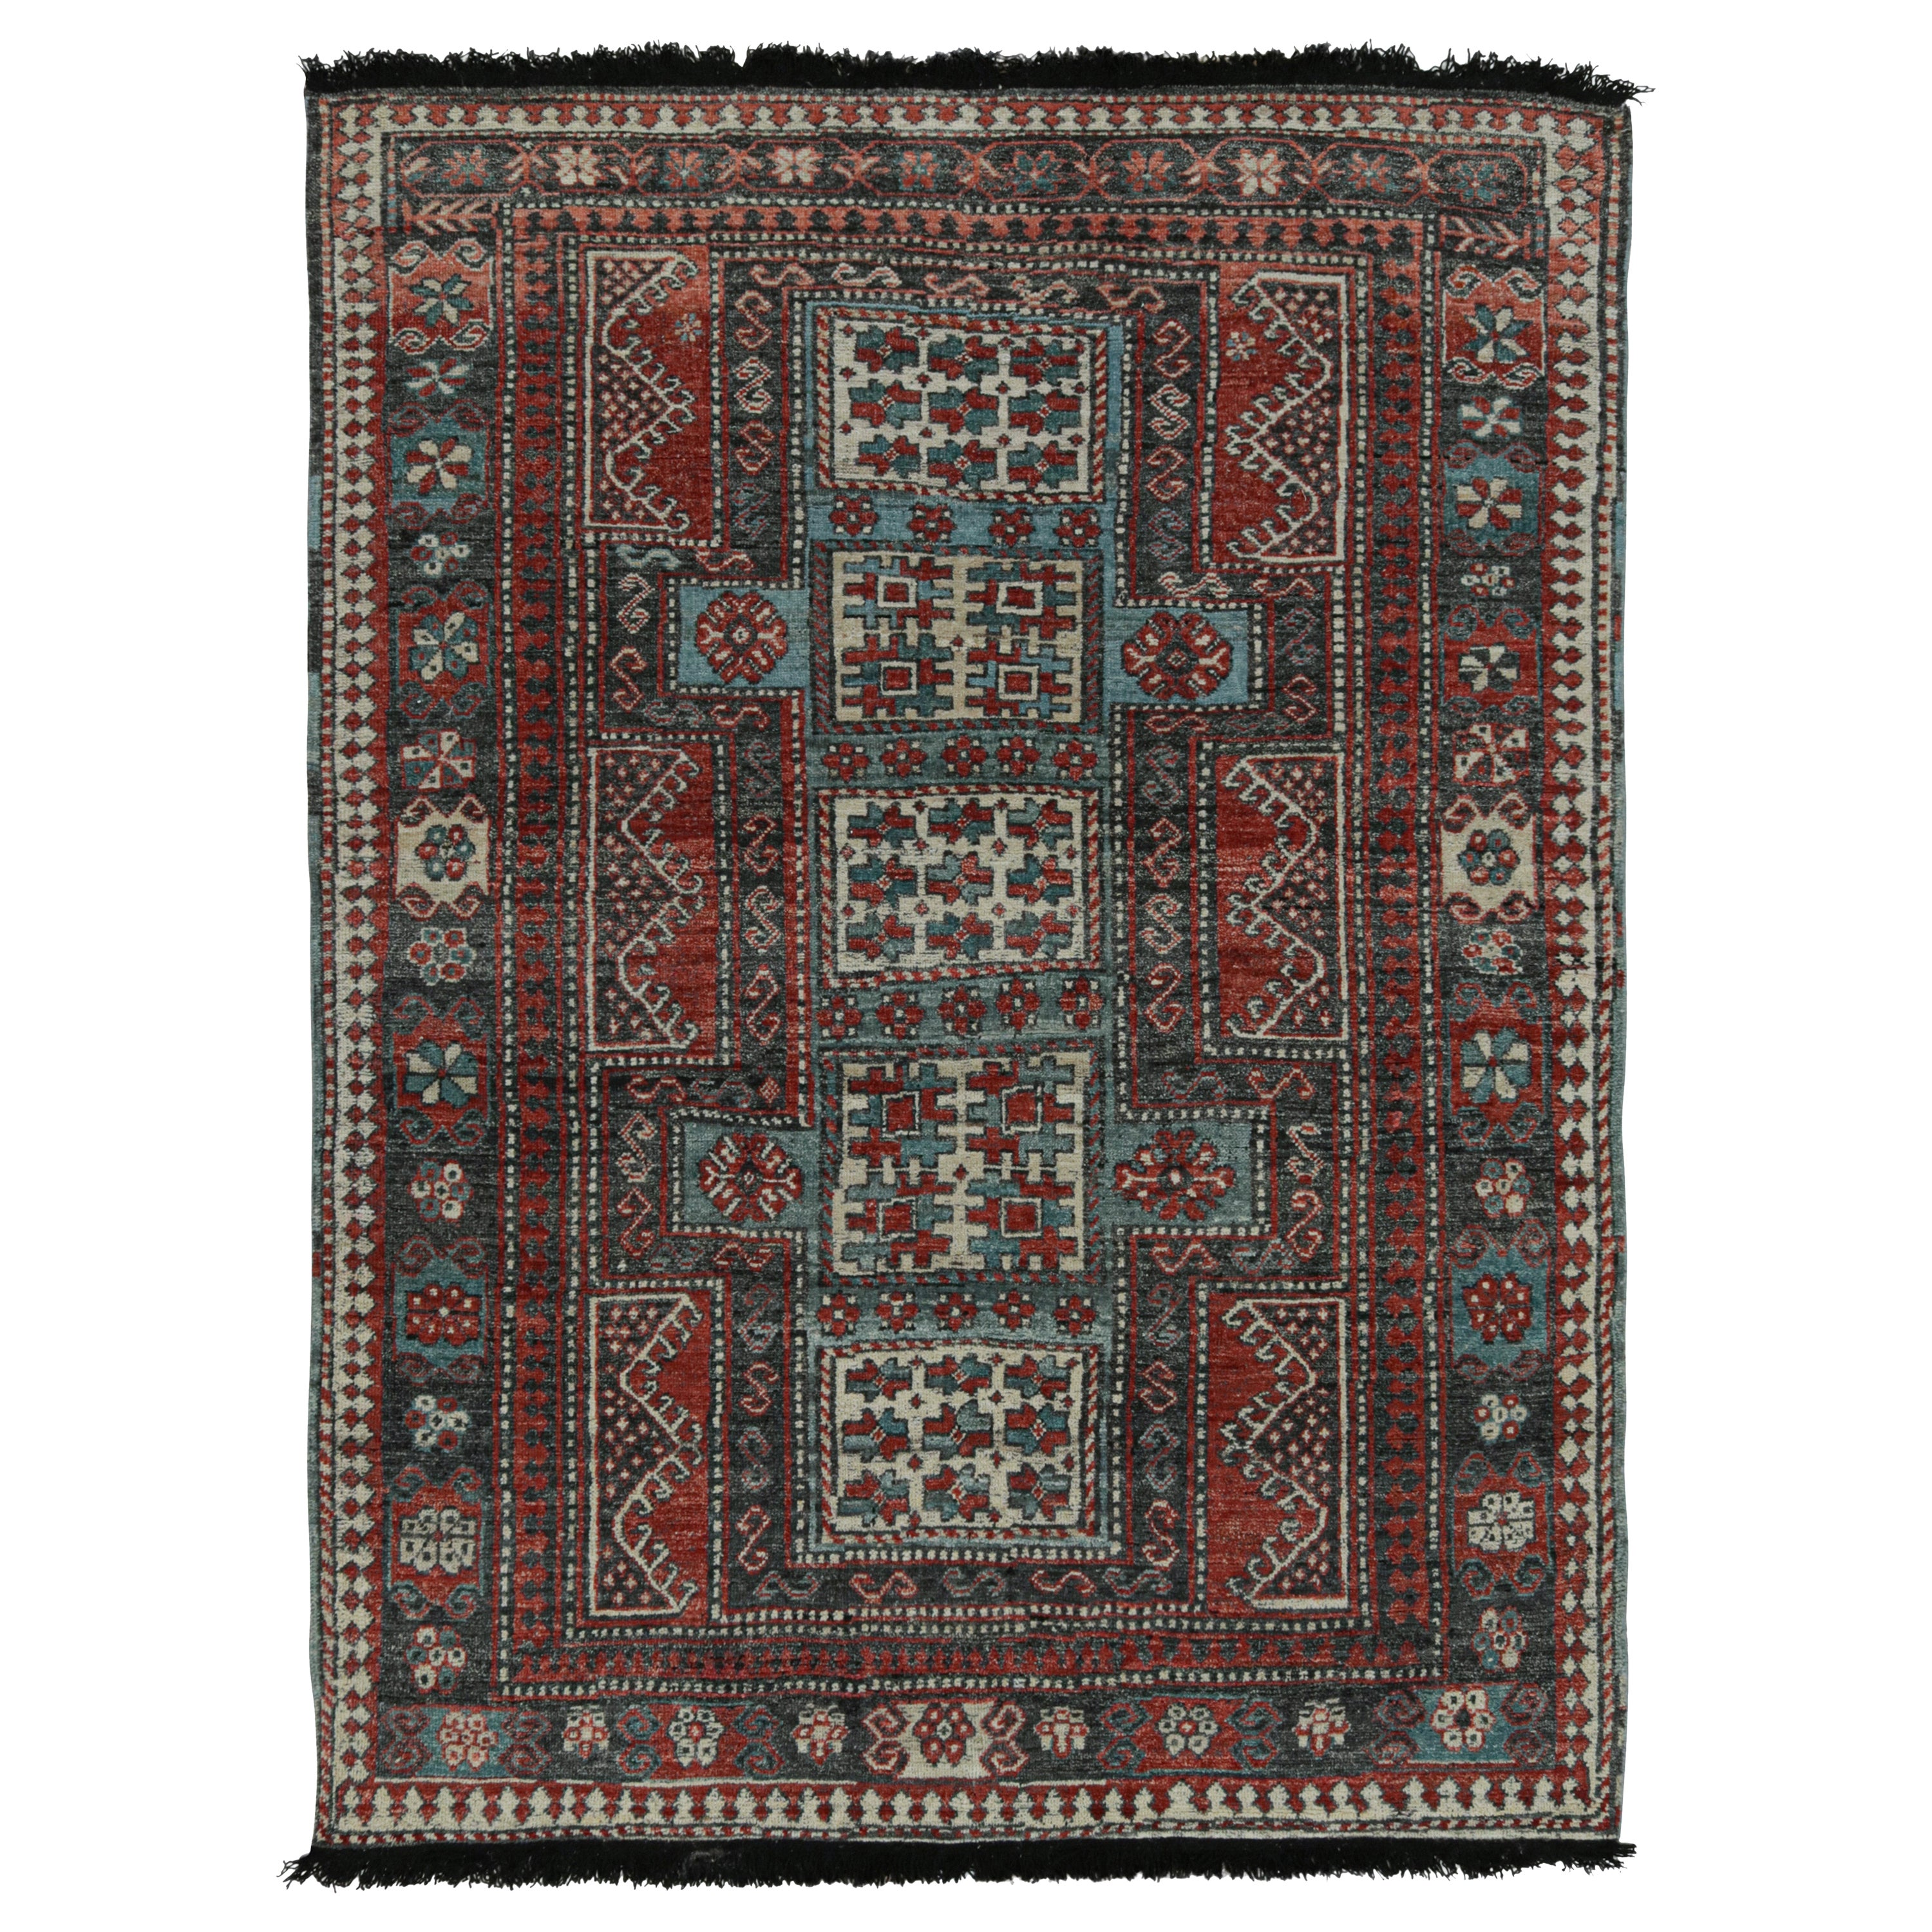 Rug & Kilim’s Tribal Style Rug in Red, Blue & Black Geometric Patterns For Sale